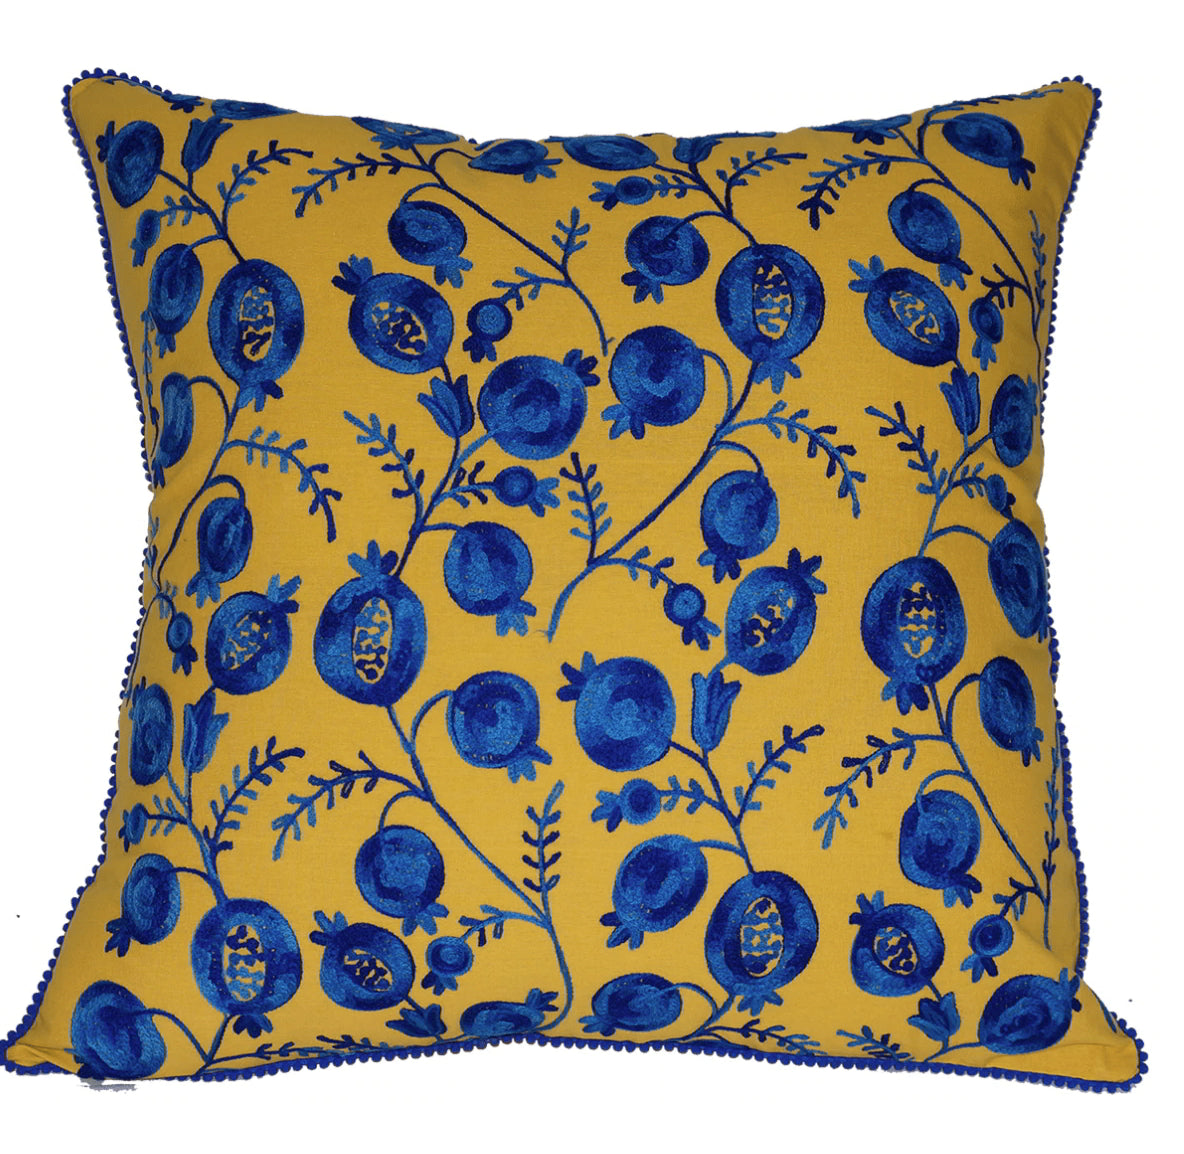 Pomegranate Cushion - Yellow / Blue House of Dudley